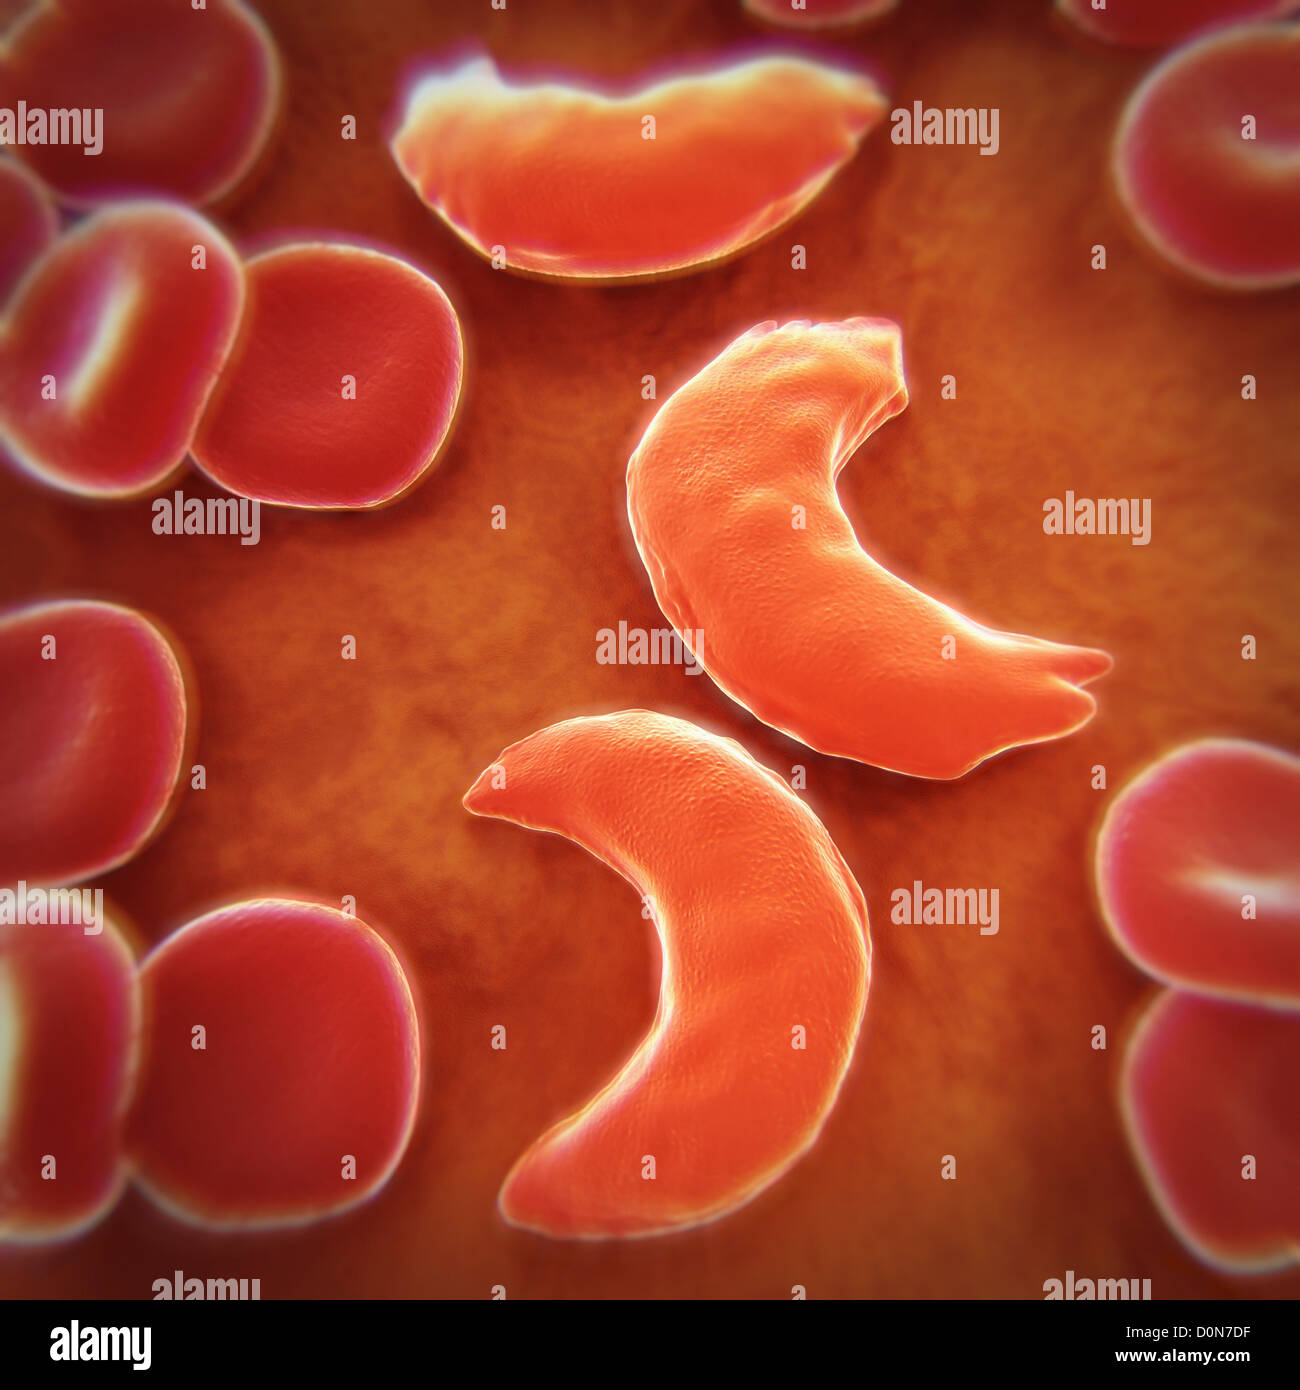 Sickle-cell disease sickle-cell anaemia or drepanocytosis is recessive genetic blood disorder characterized red blood cells Stock Photo